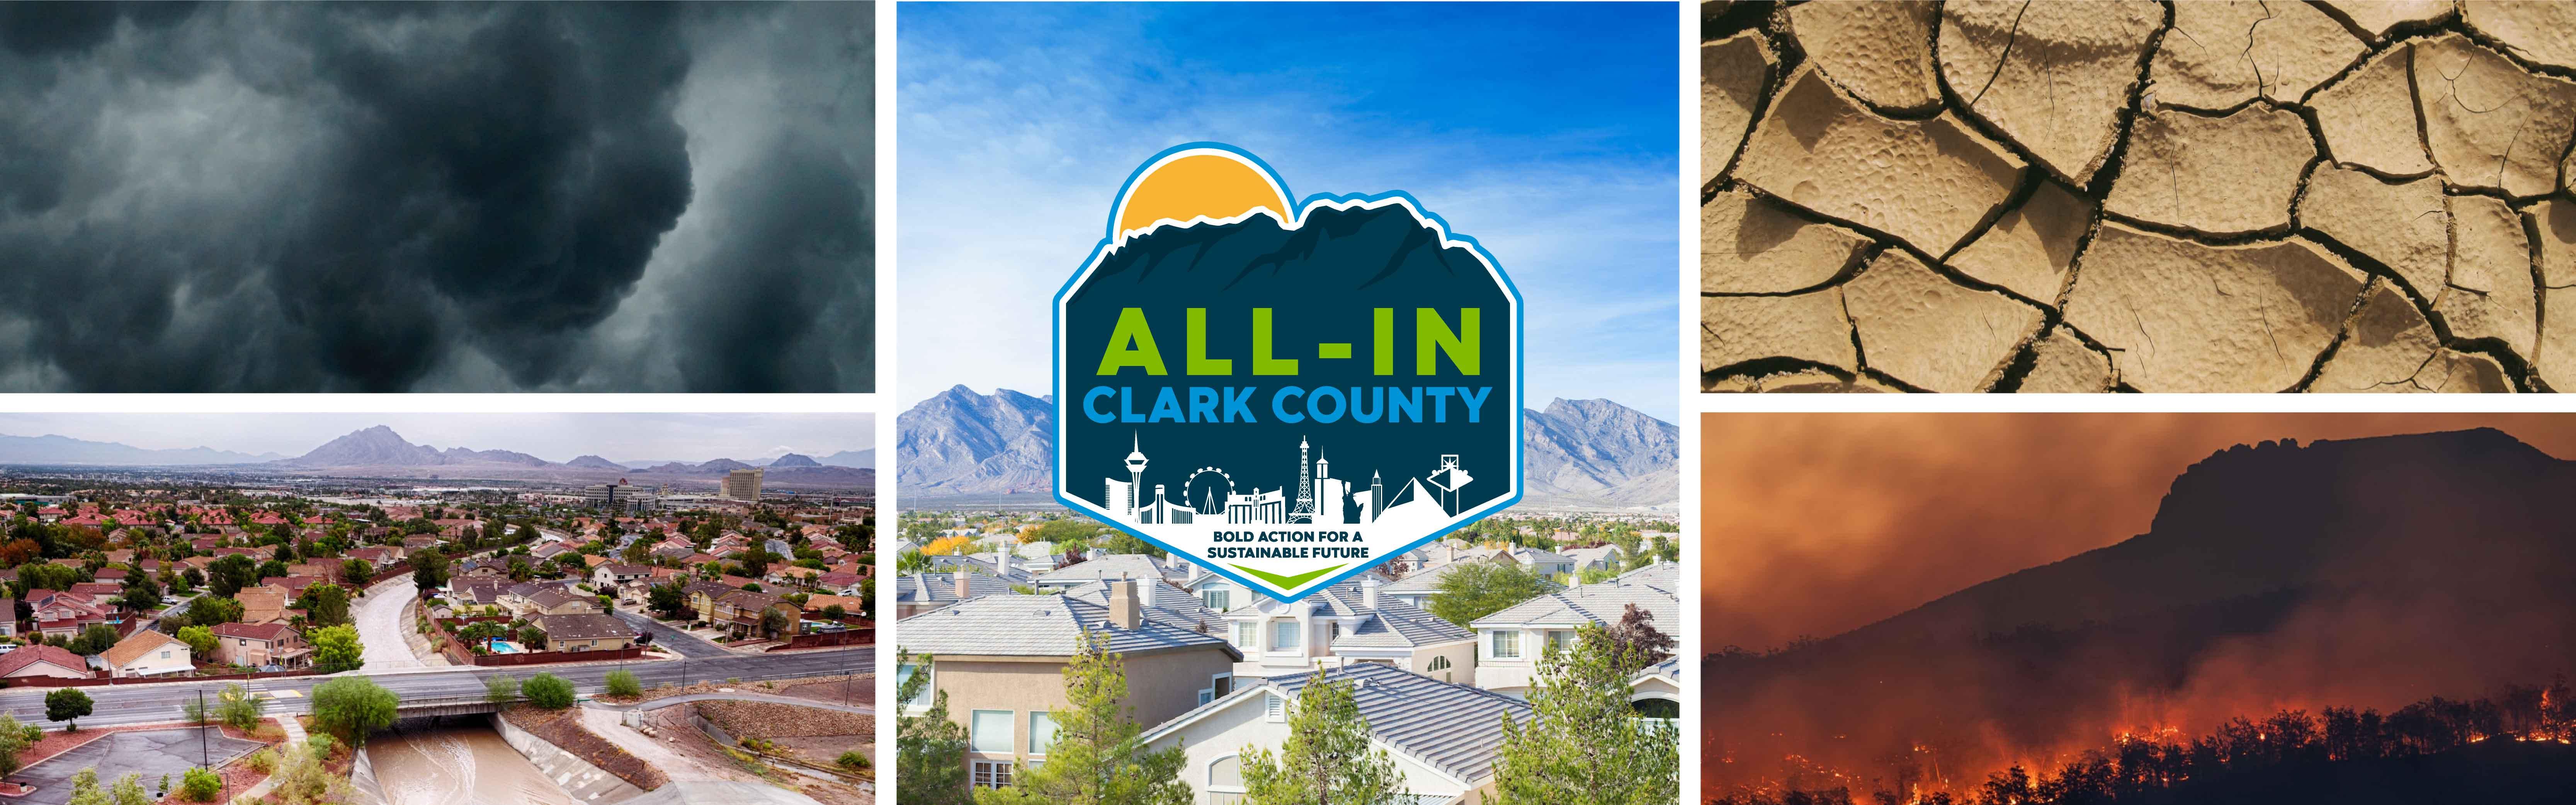 Photo collage of images of climate impacts, flooding, wildfire, drought, and storms with center image of All-In Clark County logo. 